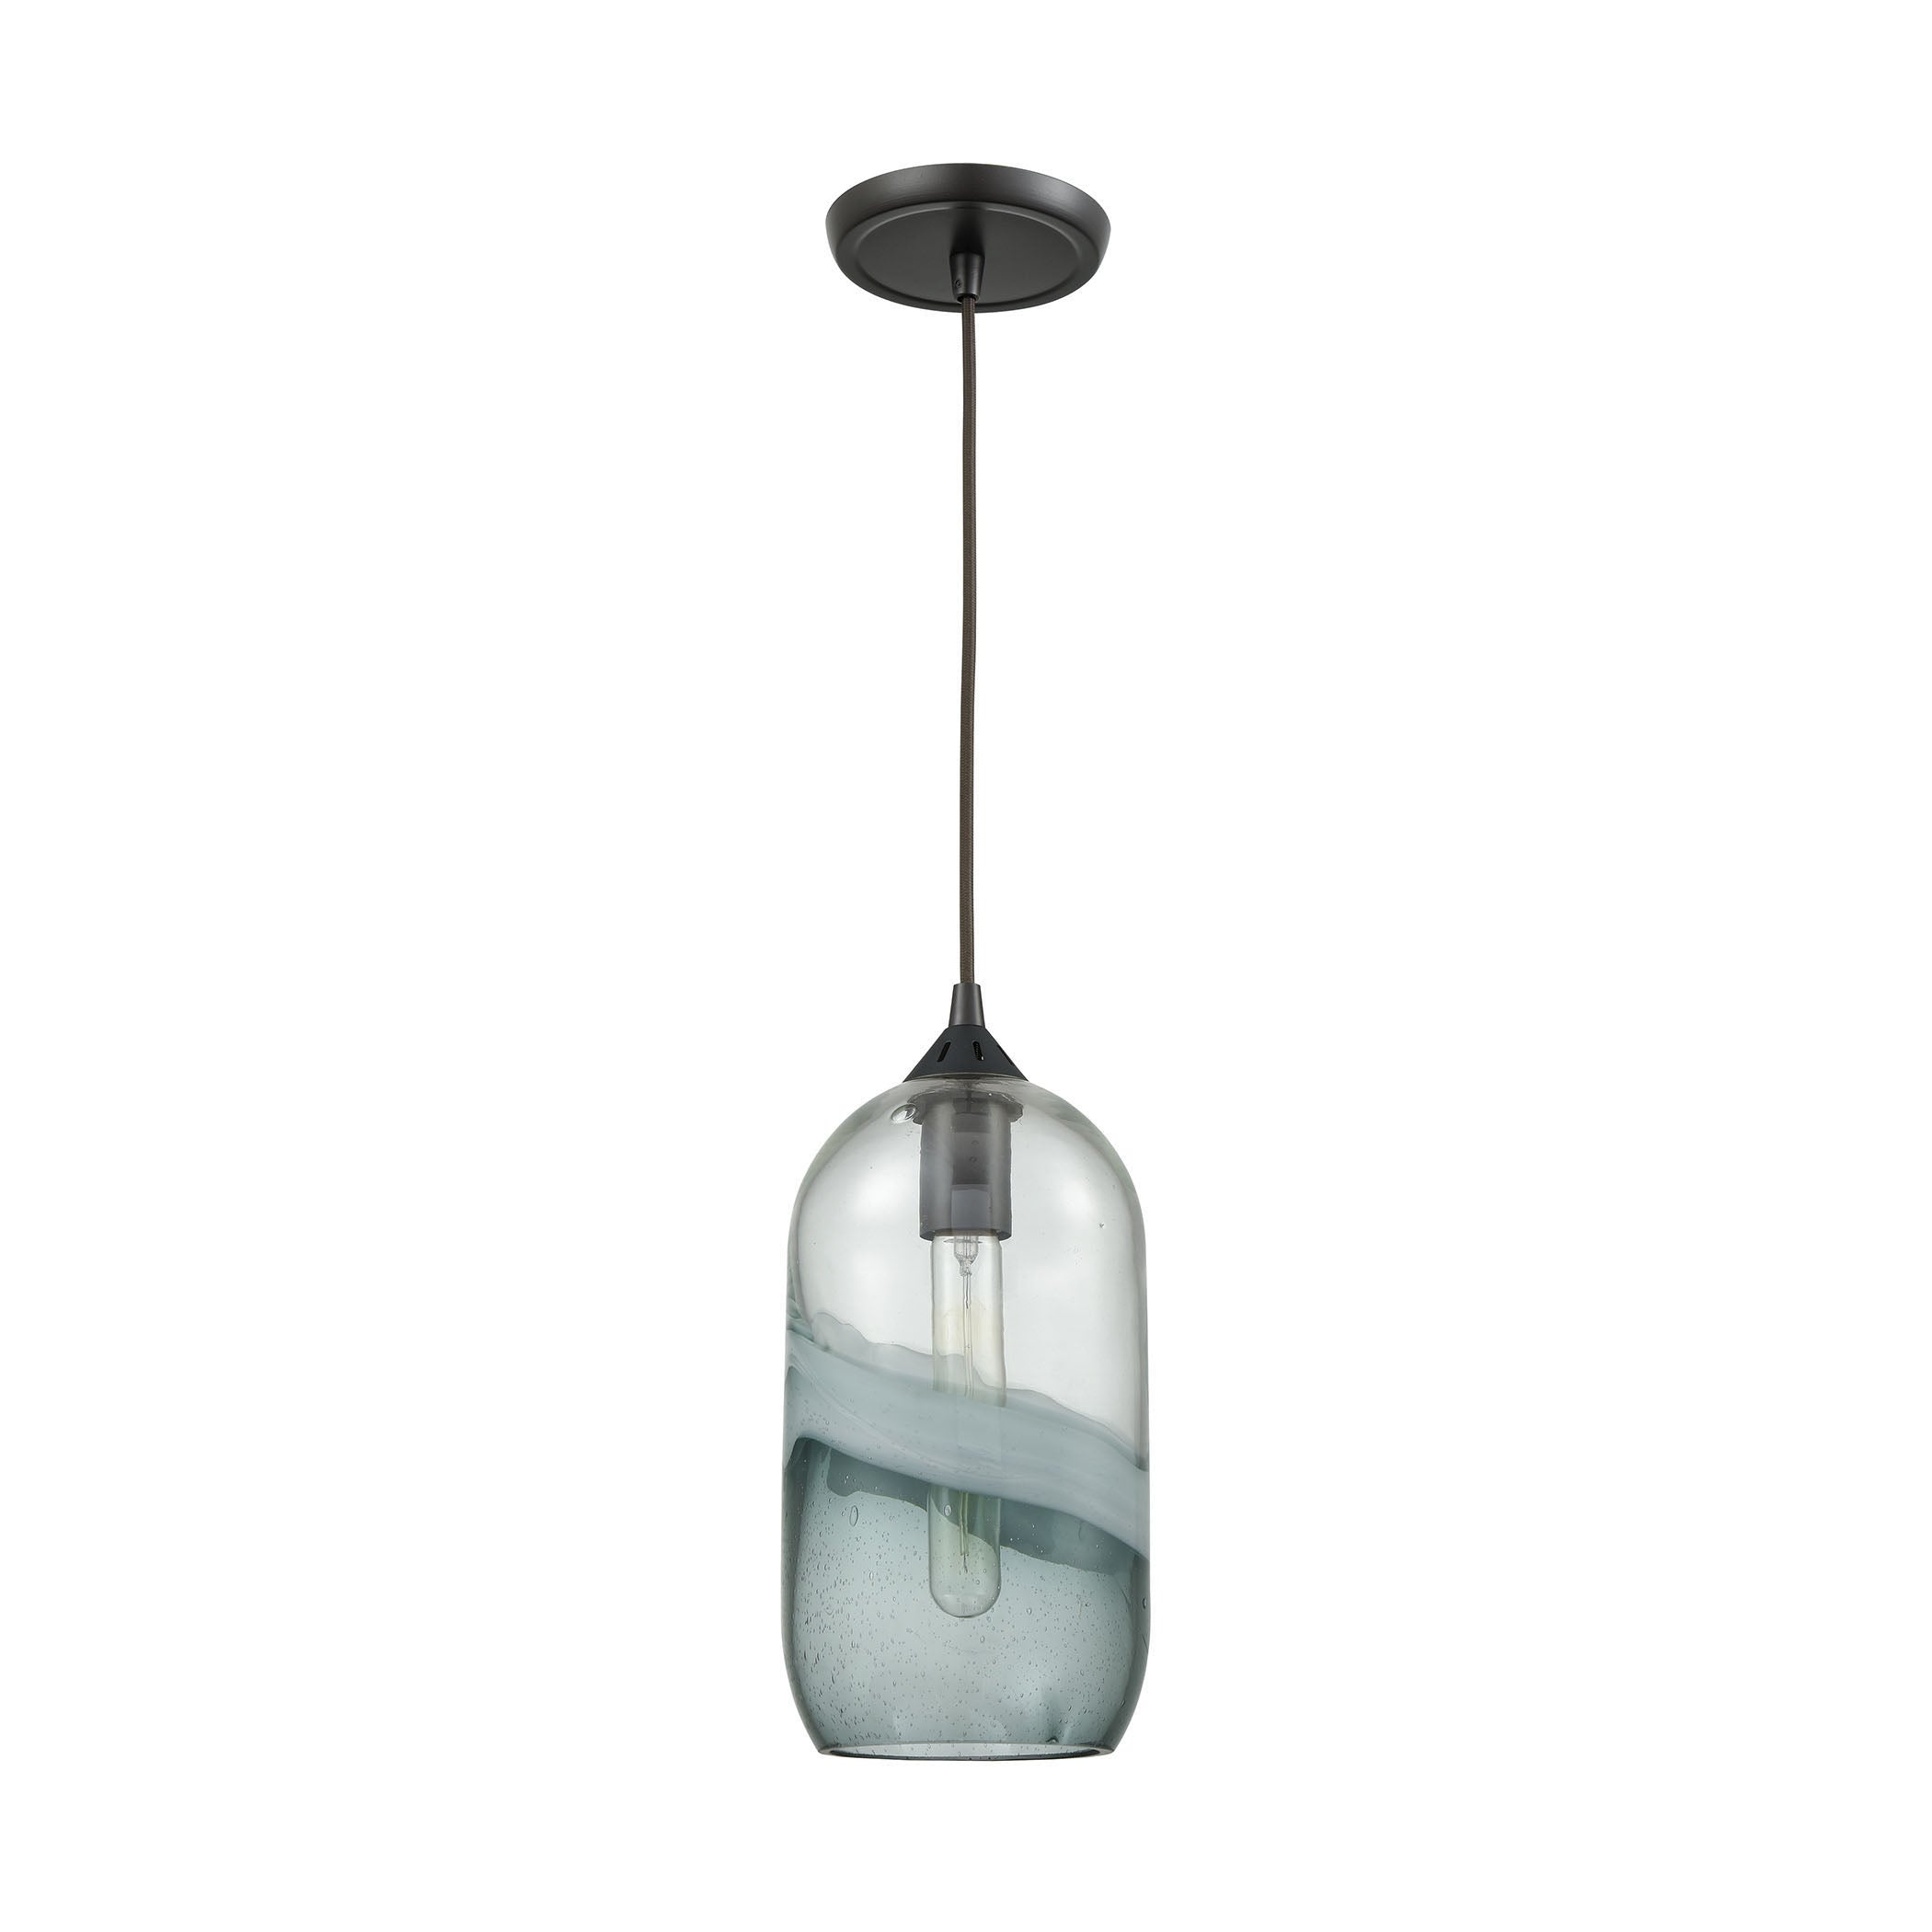 ELK Lighting 25102/1 Sutter Creek 1-Light Mini Pendant in Oiled Bronze with Clear and Smoke Seedy Glass